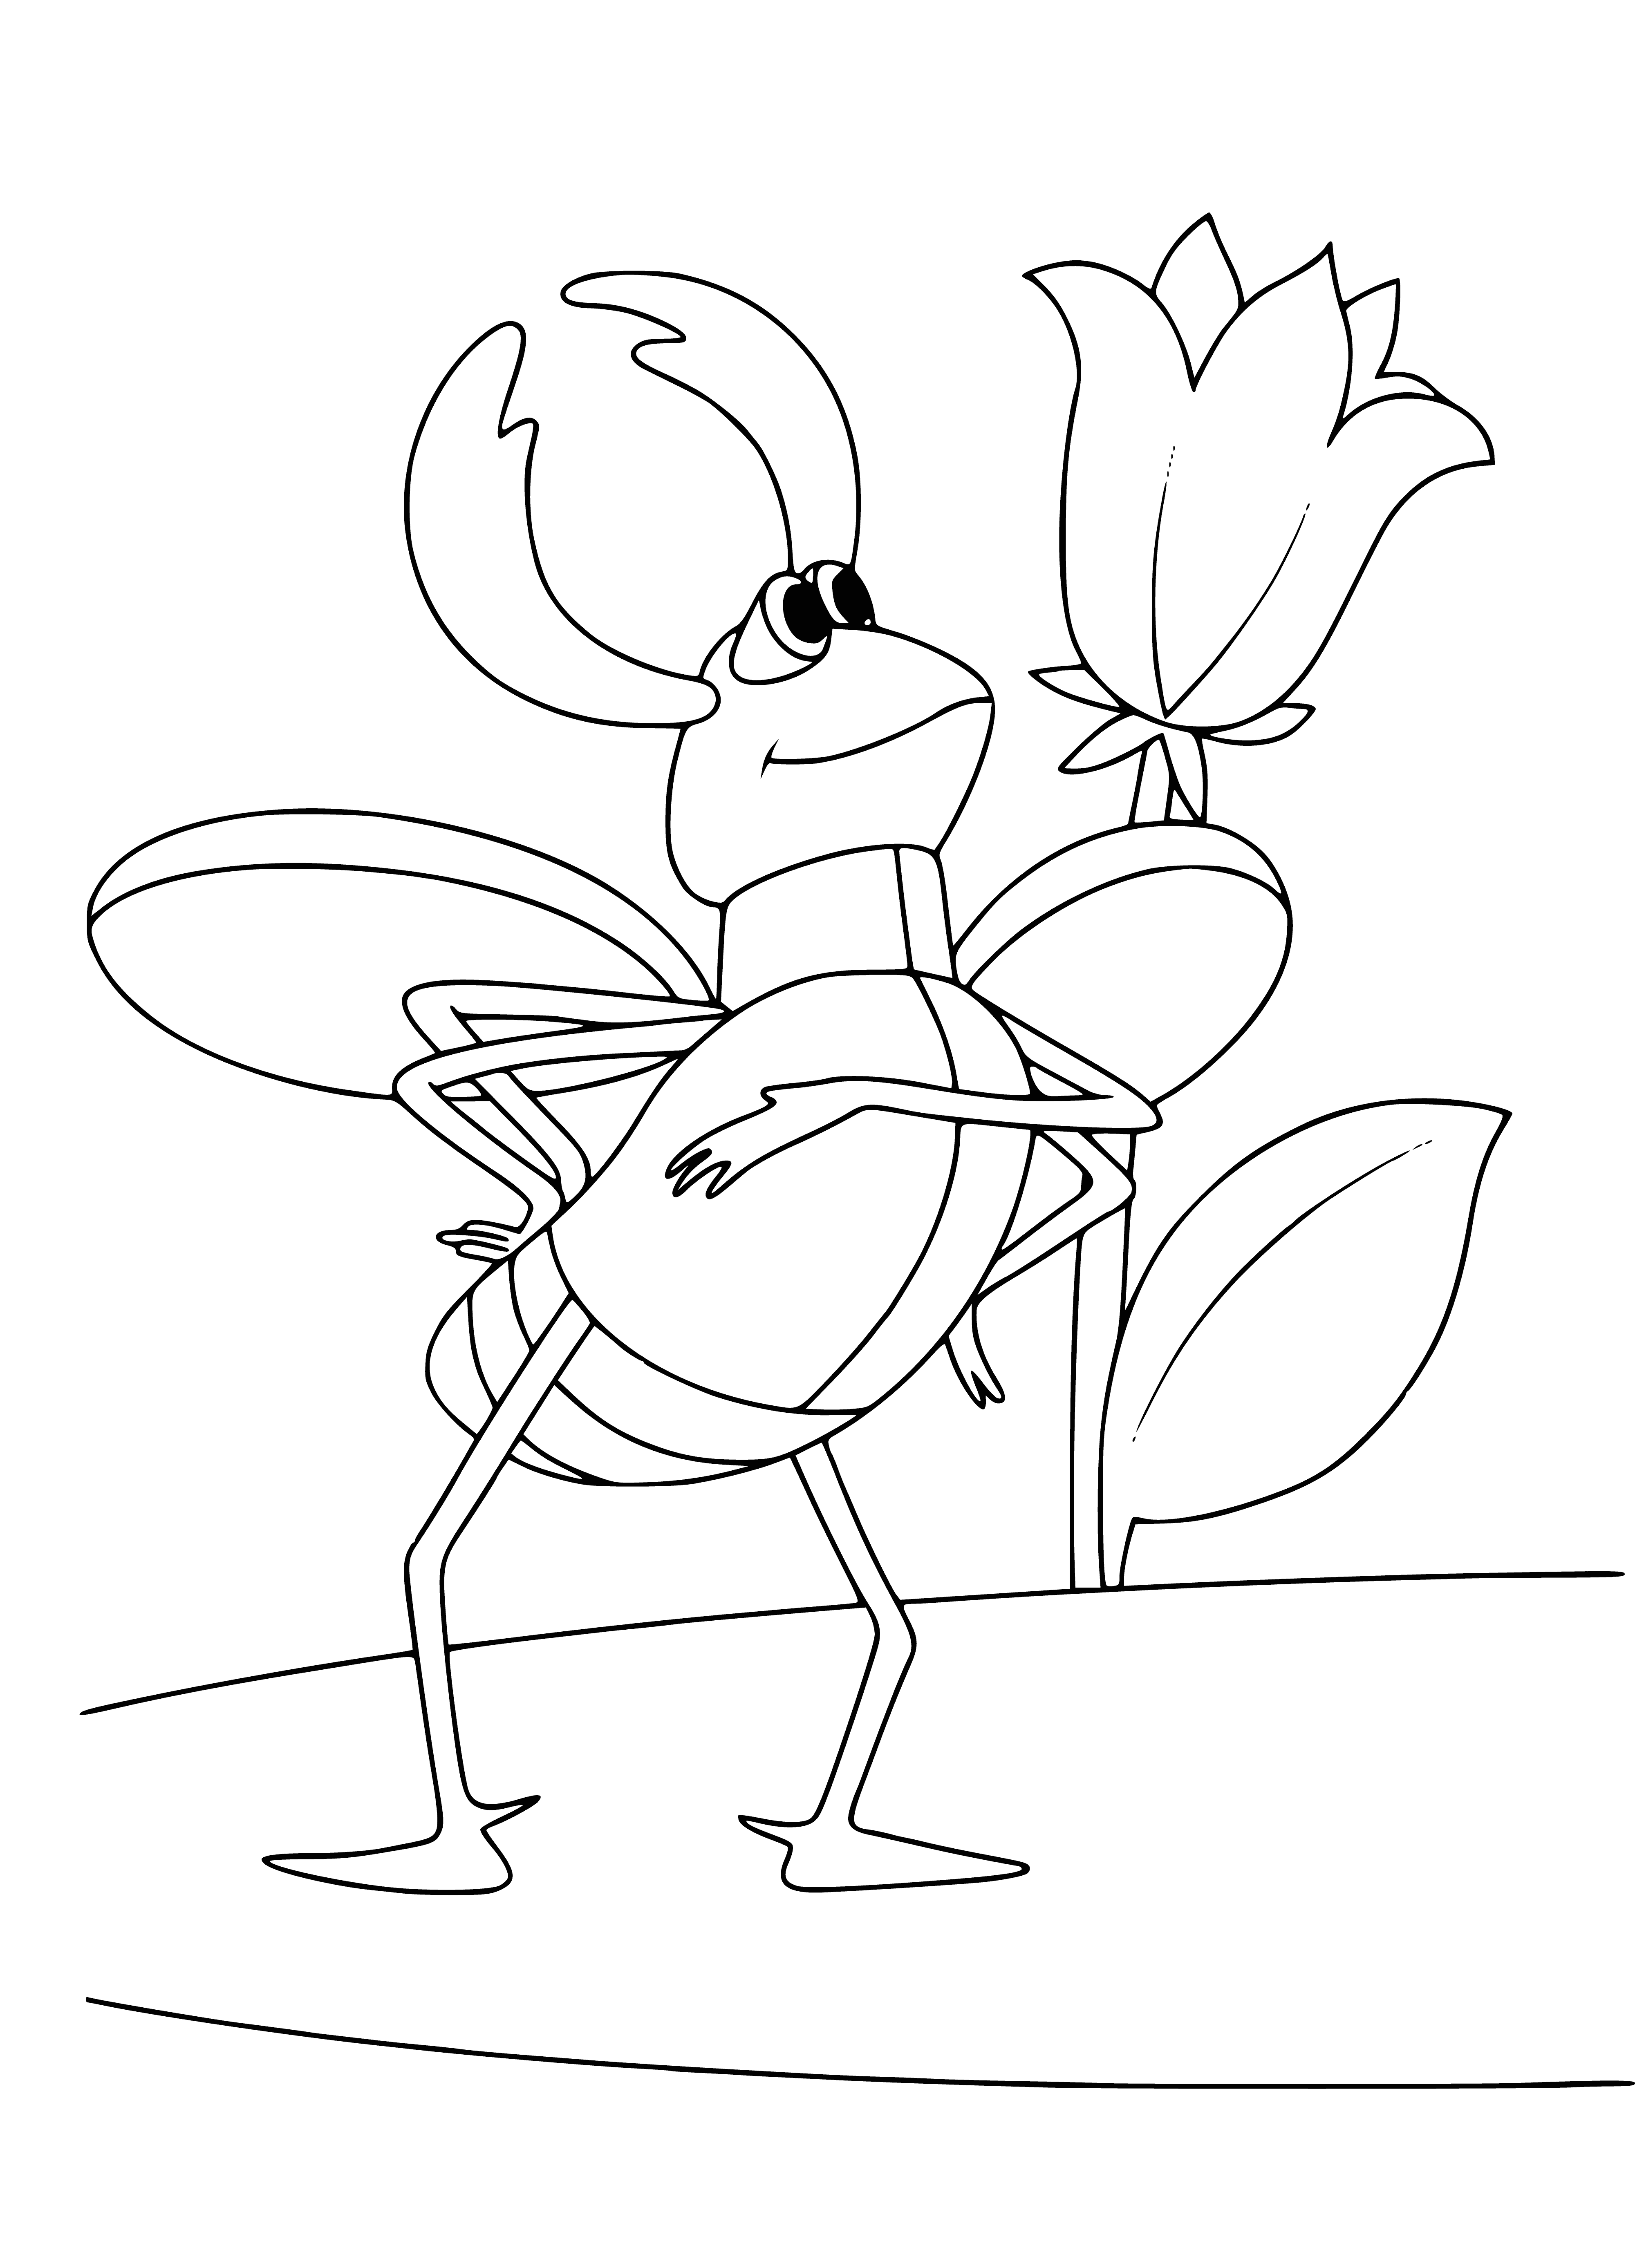 coloring page: Tiny Thumbelina chafer beetle is one of the smallest in the world, brown with bumps & ridges, 6 spindly legs & long antennae.